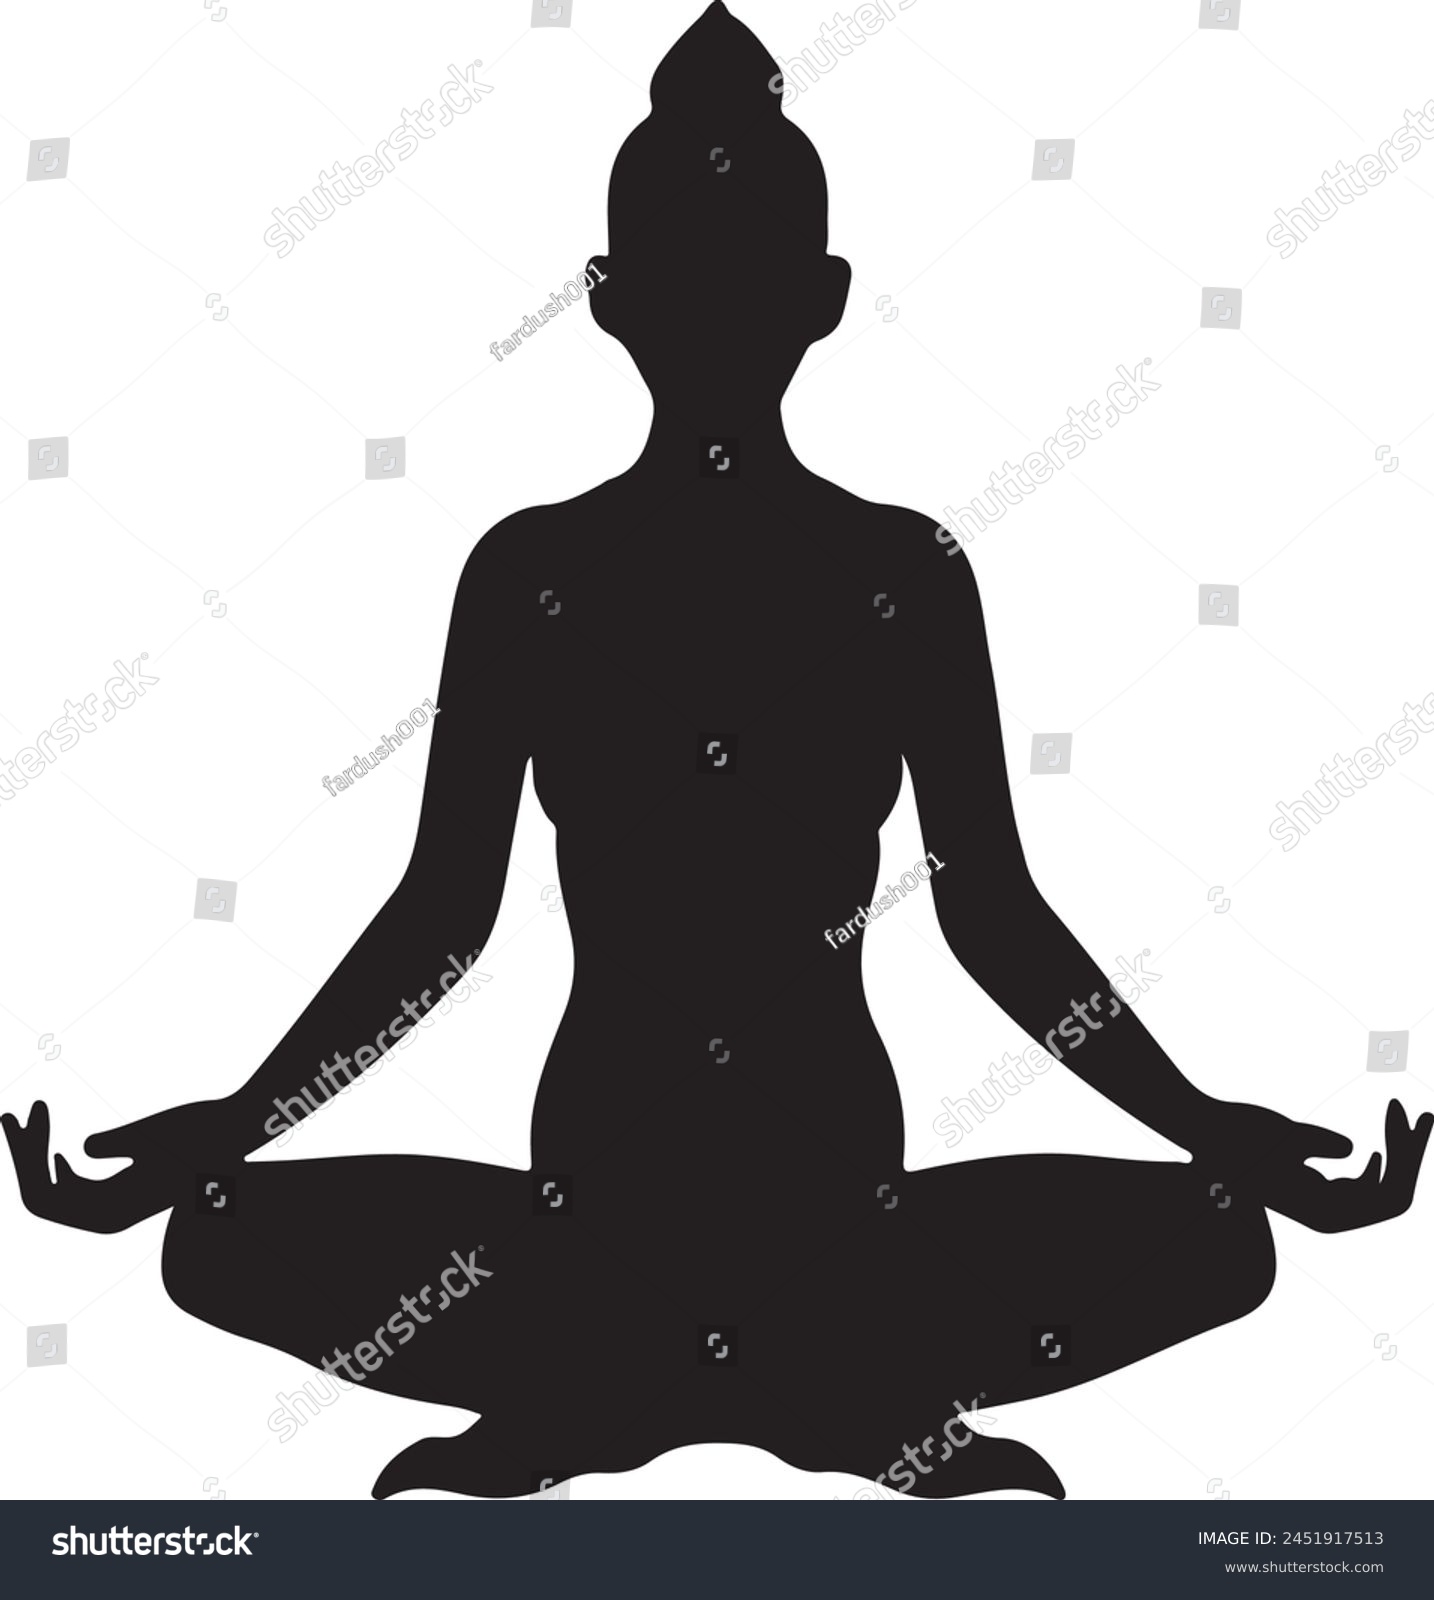 SVG of  a black silhouette of a woman doing yoga svg